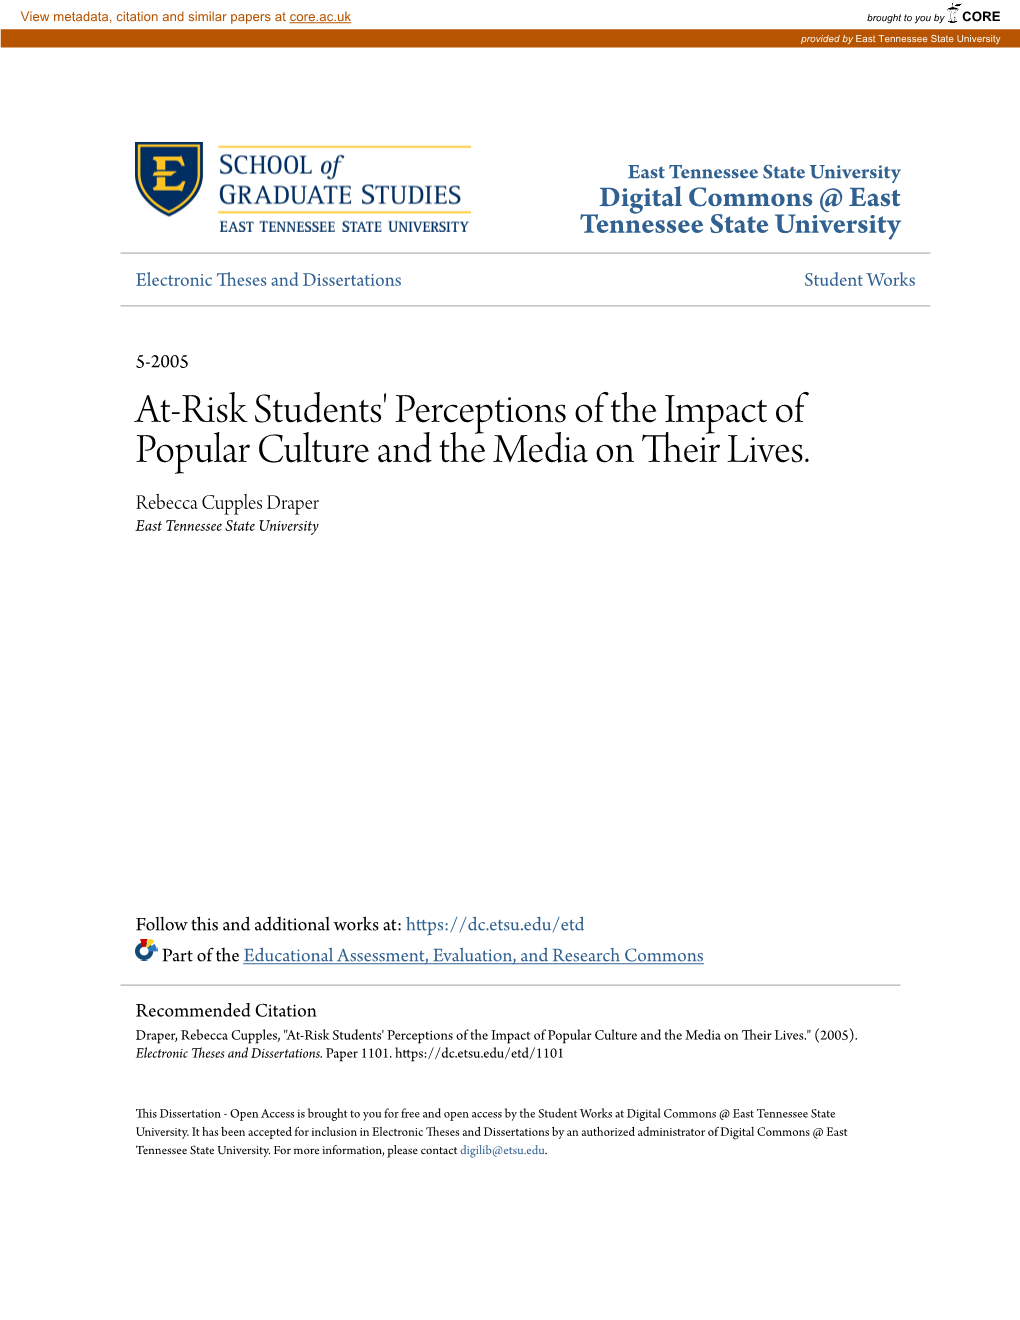 At-Risk Students' Perceptions of the Impact of Popular Culture and the Media on Their Lives